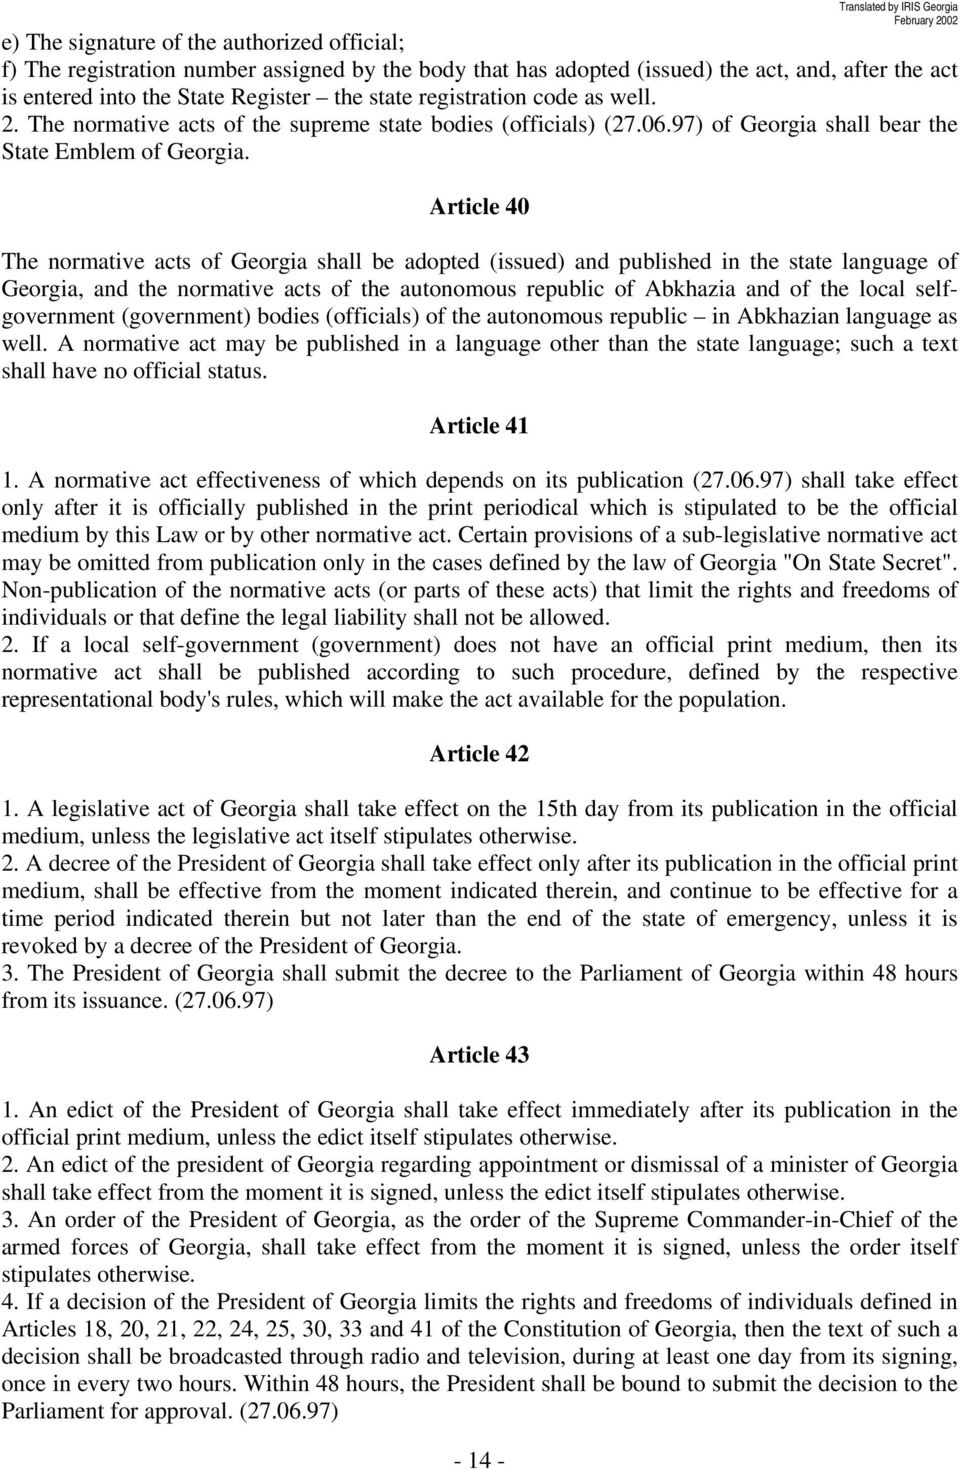 Article 40 The normative acts of Georgia shall be adopted (issued) and published in the state language of Georgia, and the normative acts of the autonomous republic of Abkhazia and of the local